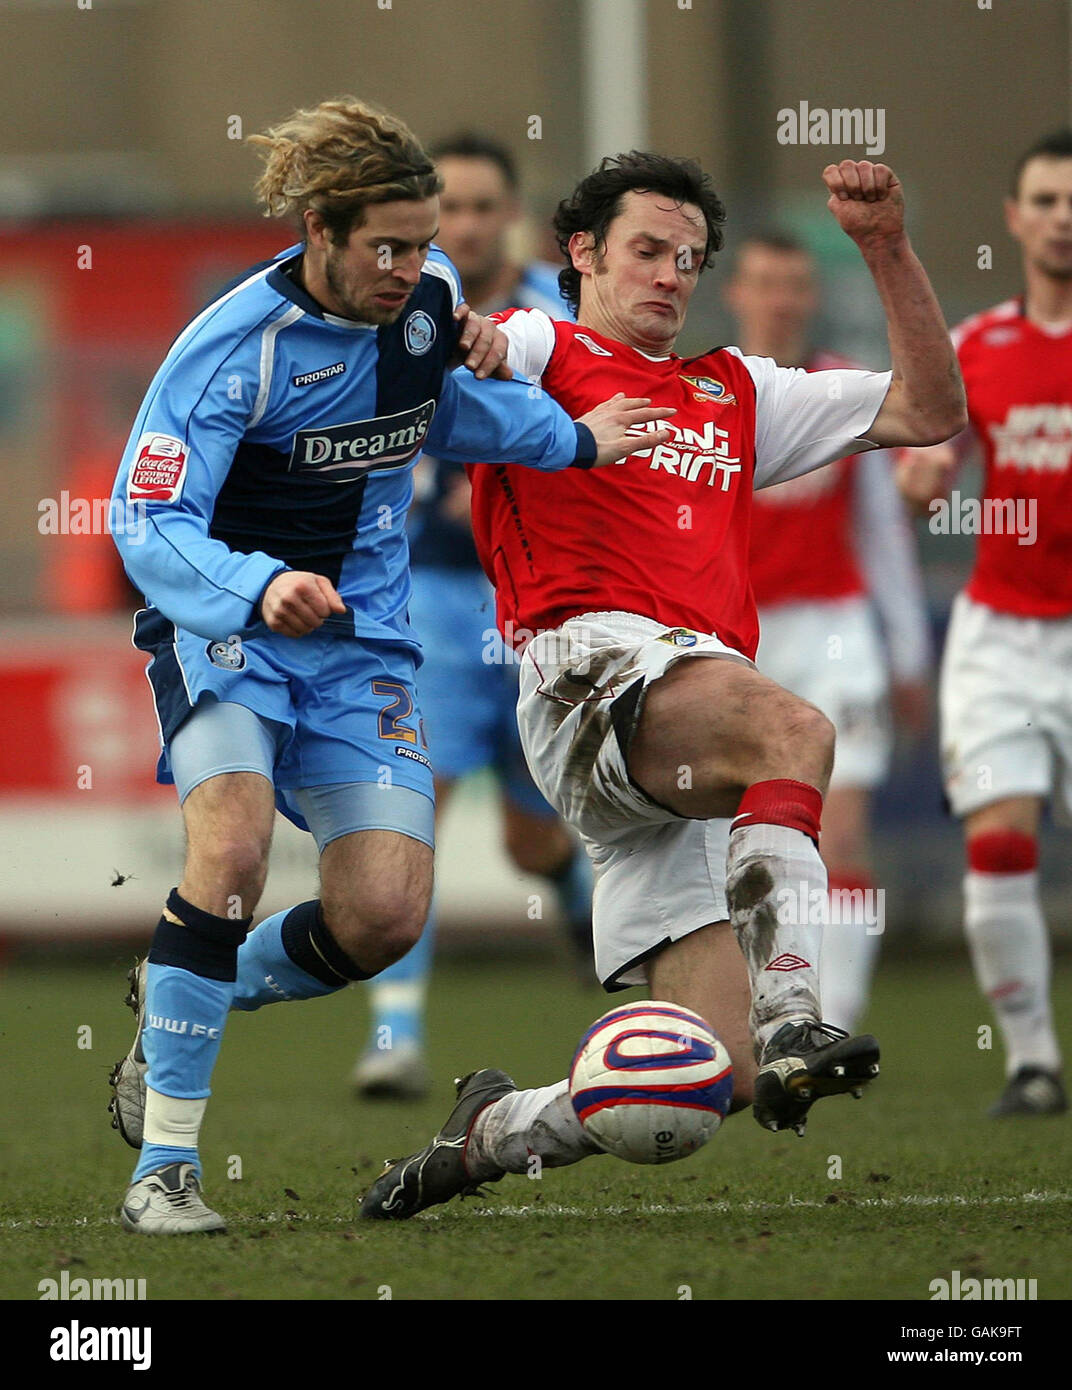 Soccer - Coca-Cola Football League Two - Morecambe v Wycombe Wanderers - Christie Park. Wycombe Wanderers Sergio Torres and Morecambe's Stuart Drummond during the Coca-Cola League Two match at Christie Park, Morecambe. Stock Photo